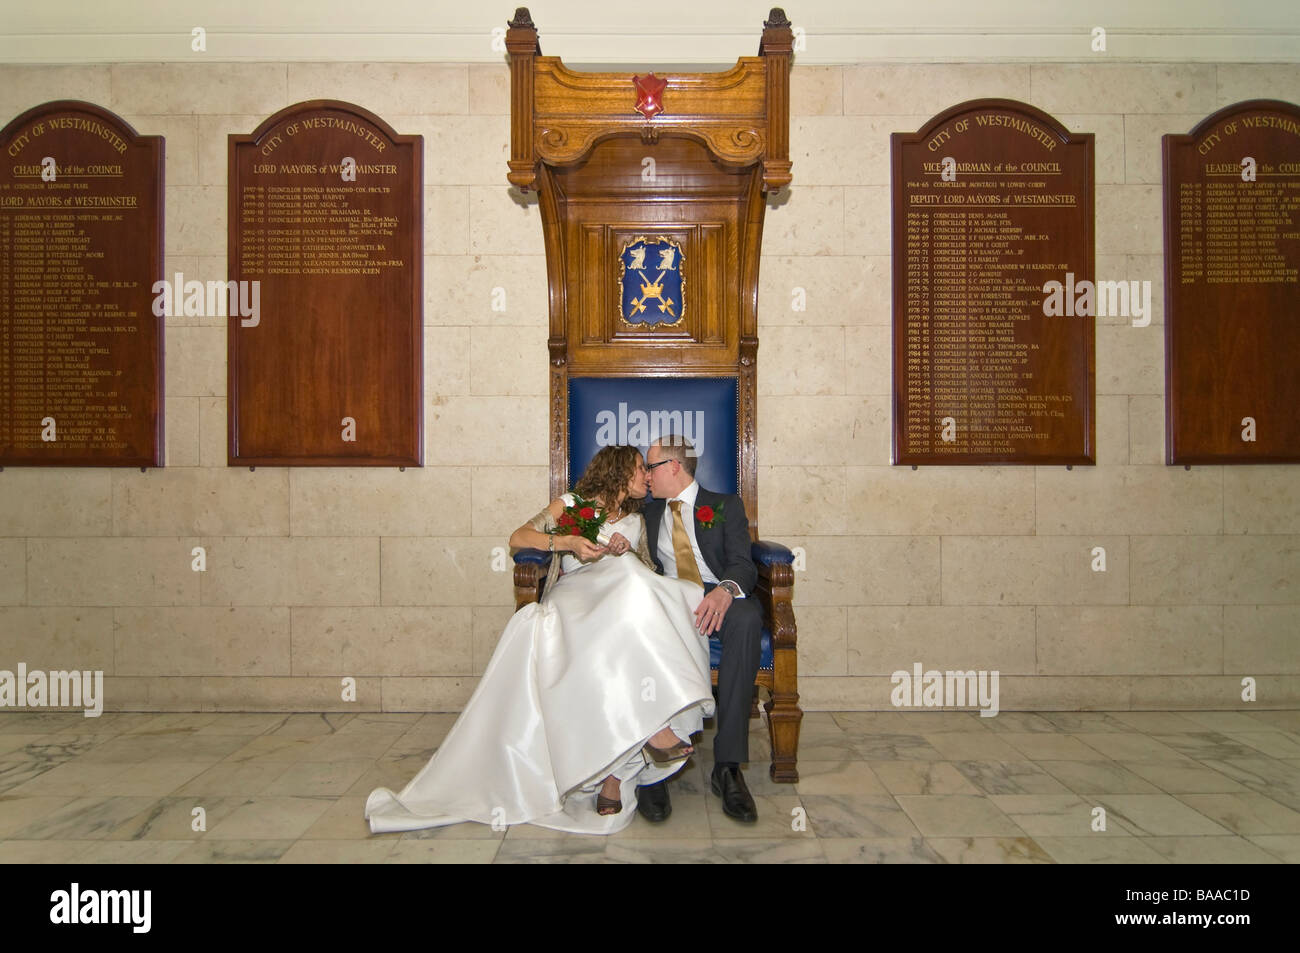 Horizontal wide angle portrait of newly wed bride and groom sitting together on a large formal throne style wooden chair Stock Photo